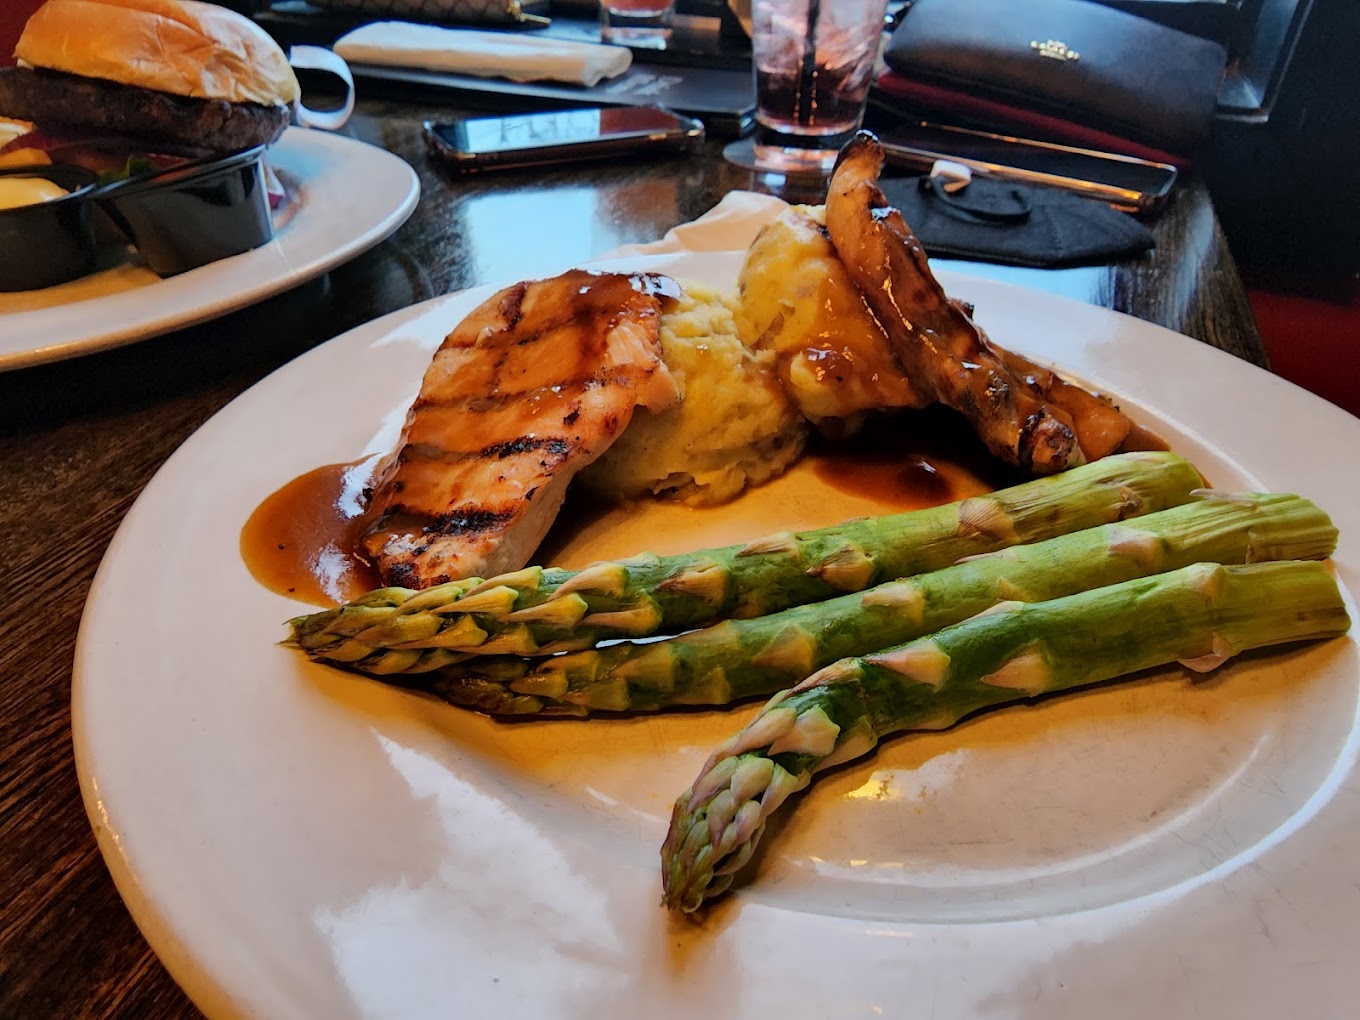 Grilled Salmon and Asparagus on a plate